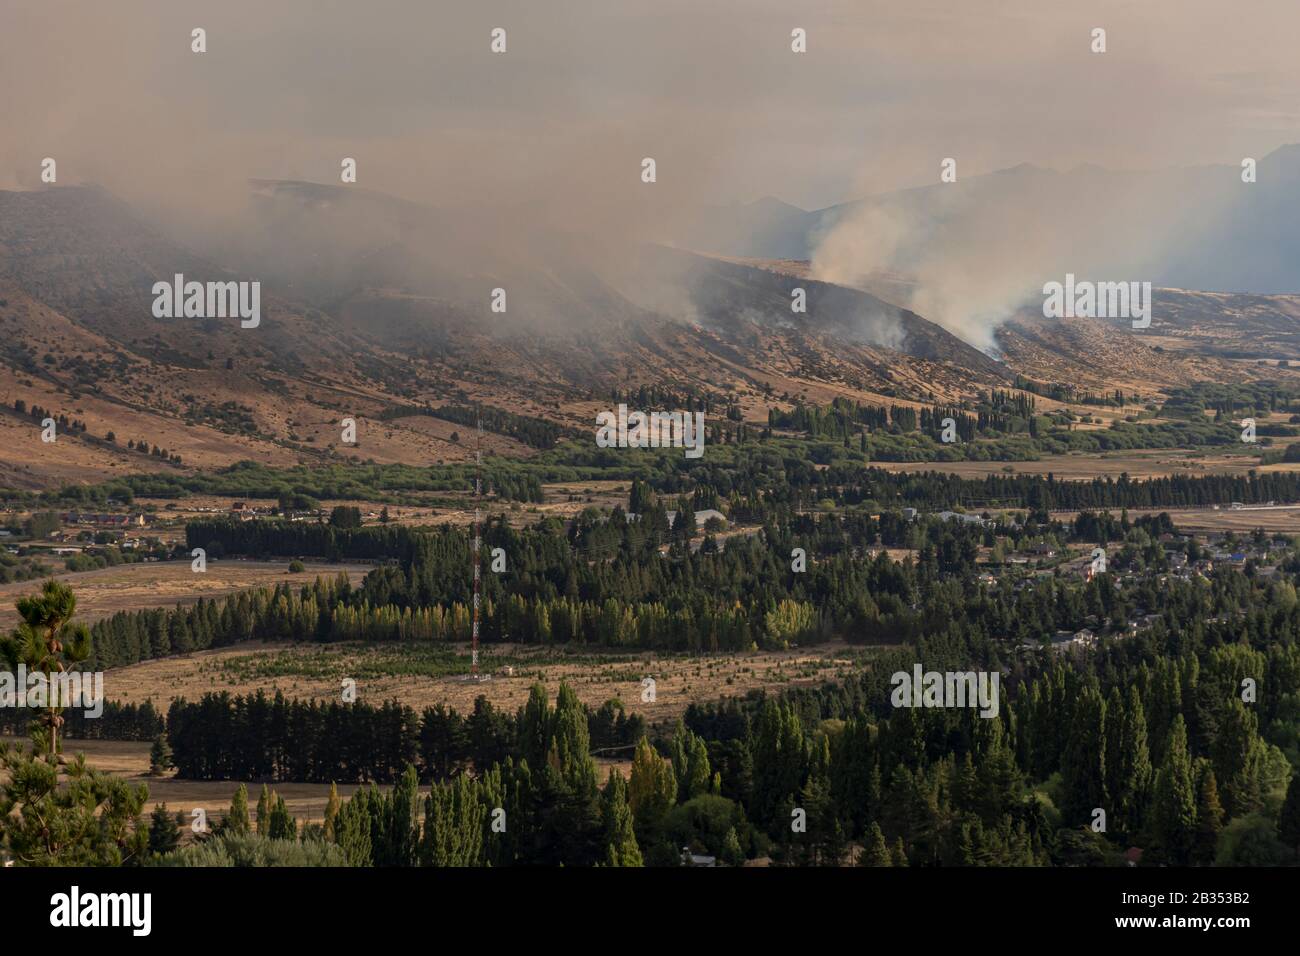 Landscape view of wildfires occurred in Esquel, Patagonia, Argentina on March 3 2020 Stock Photo